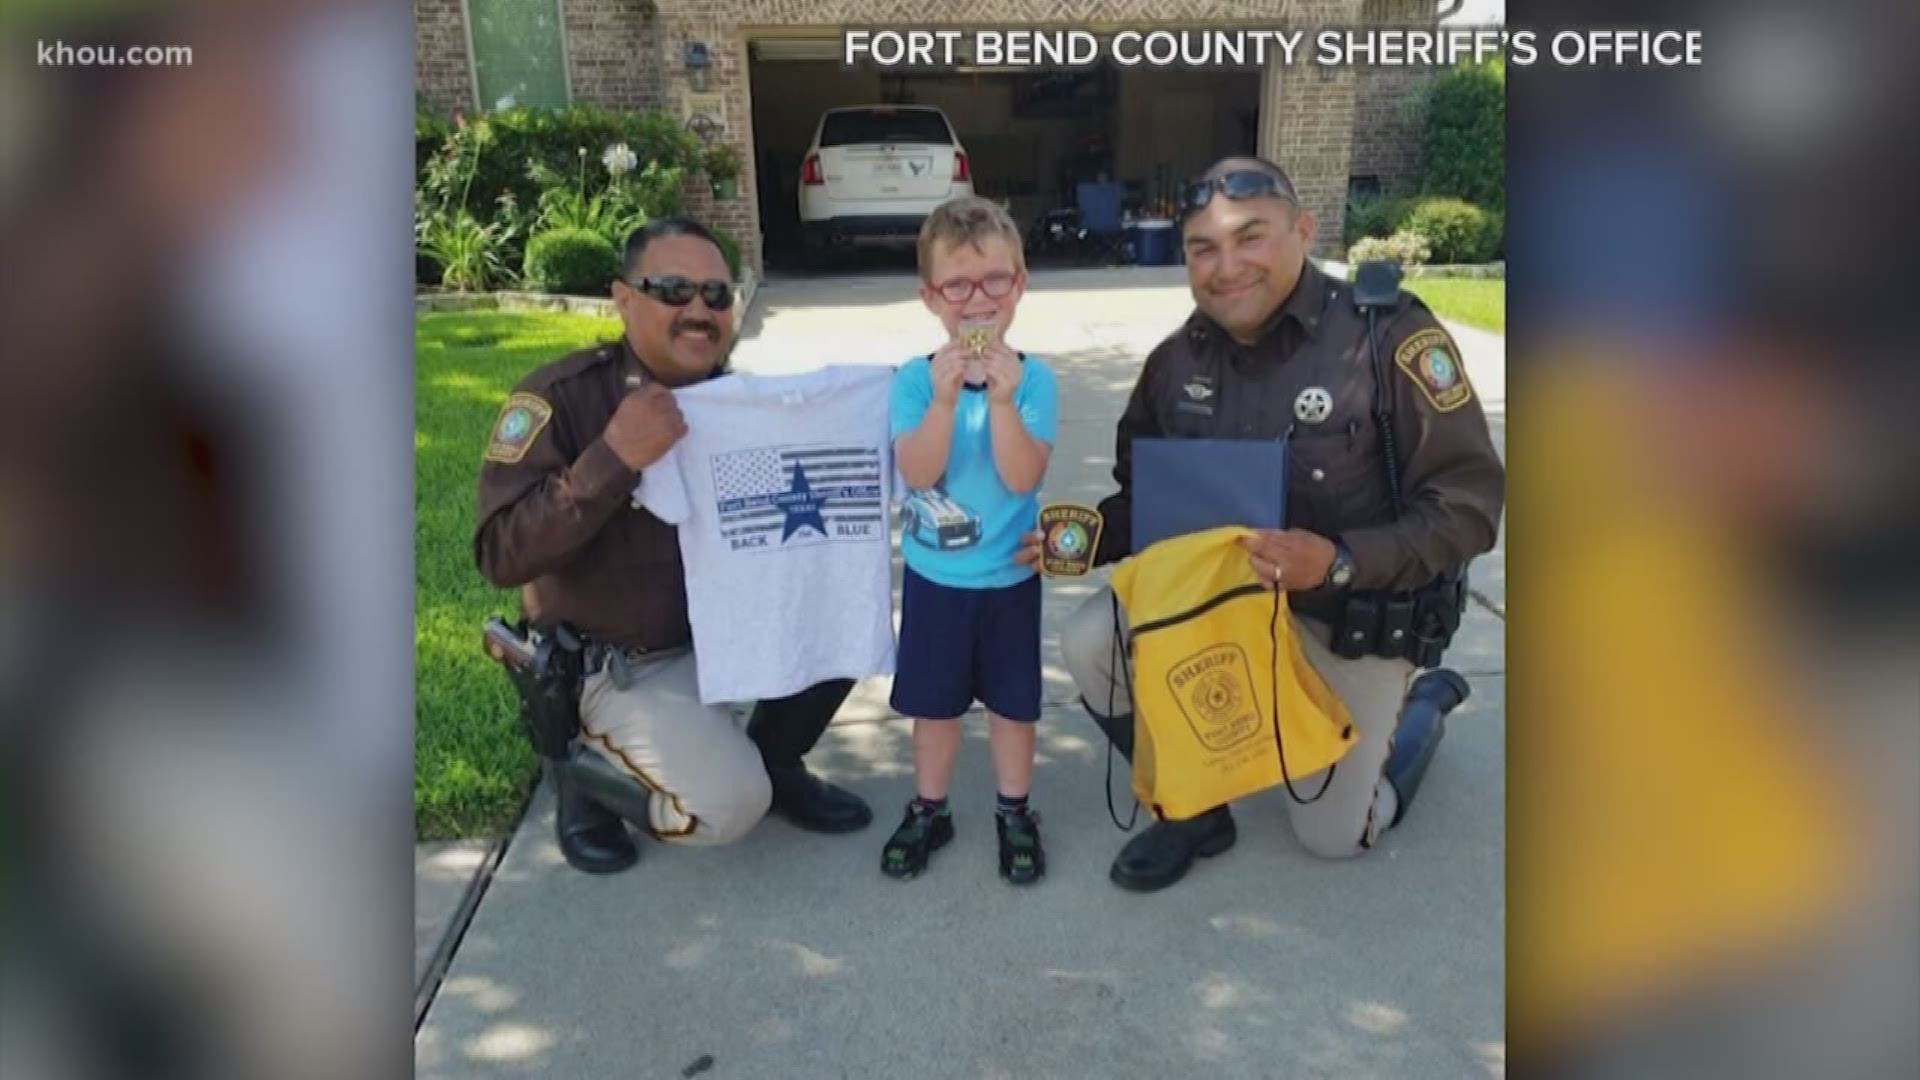 A kid in Fort Bend County got to meet his idols! The sheriff's office posted pictures of the meeting. They say the kid's grandma contacted them saying her grandson has a little police motorcycle, even patrols his streets. So the deputies dropped by and let him sit on a real bike.